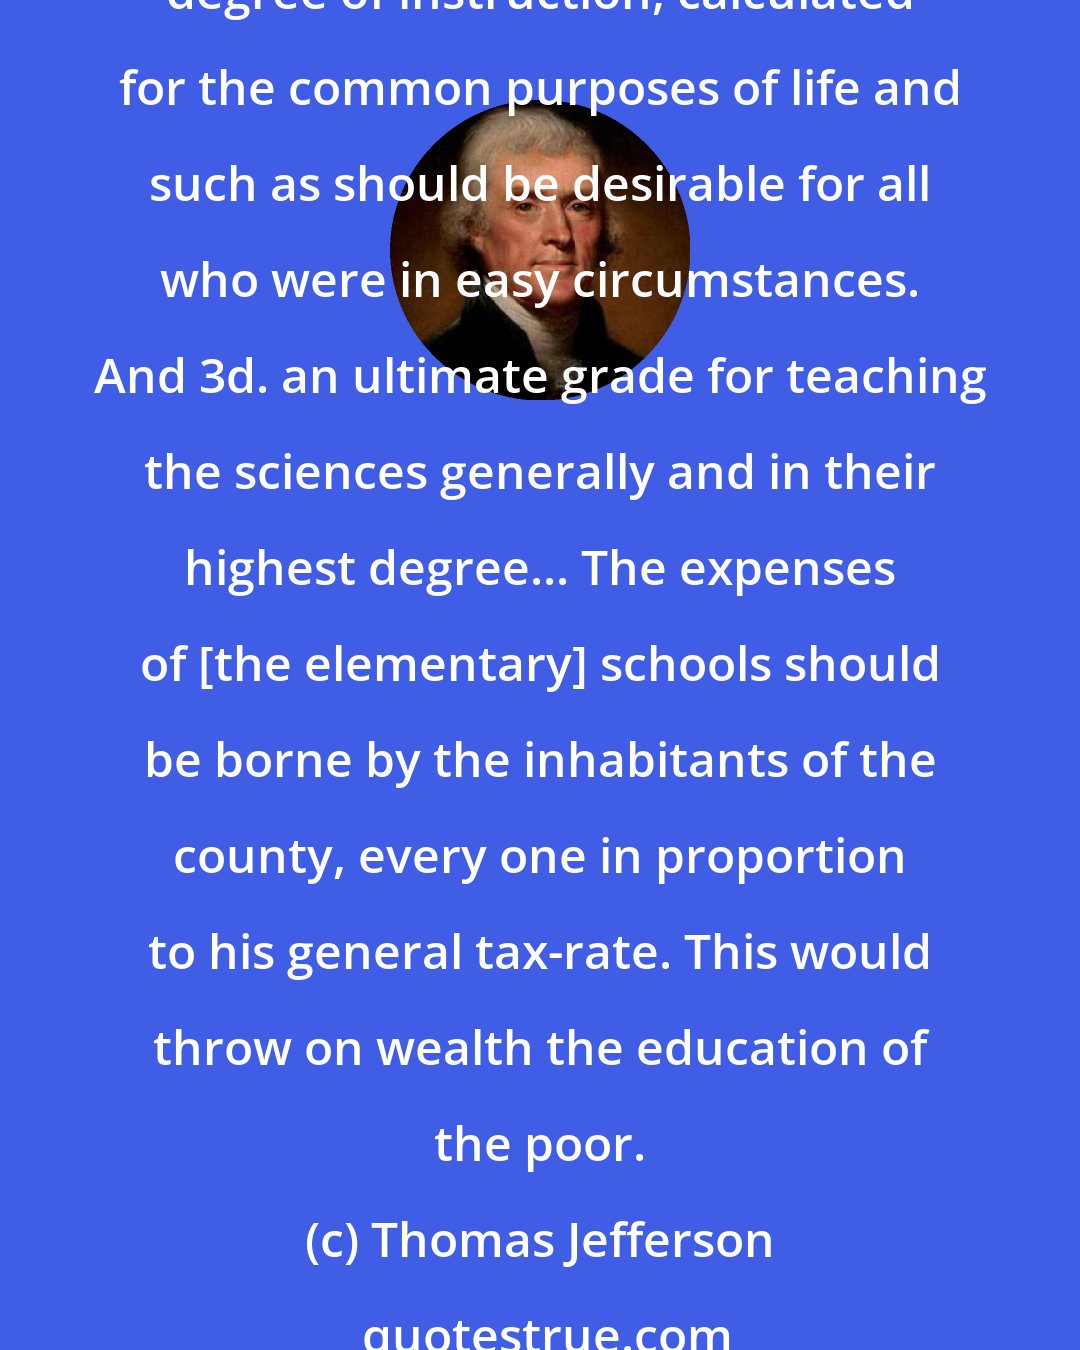 Thomas Jefferson: I... [proposed] three distinct grades of education, reaching all classes. 1. Elementary schools for all children generally, rich and poor. 2. Colleges for a middle degree of instruction, calculated for the common purposes of life and such as should be desirable for all who were in easy circumstances. And 3d. an ultimate grade for teaching the sciences generally and in their highest degree... The expenses of [the elementary] schools should be borne by the inhabitants of the county, every one in proportion to his general tax-rate. This would throw on wealth the education of the poor.